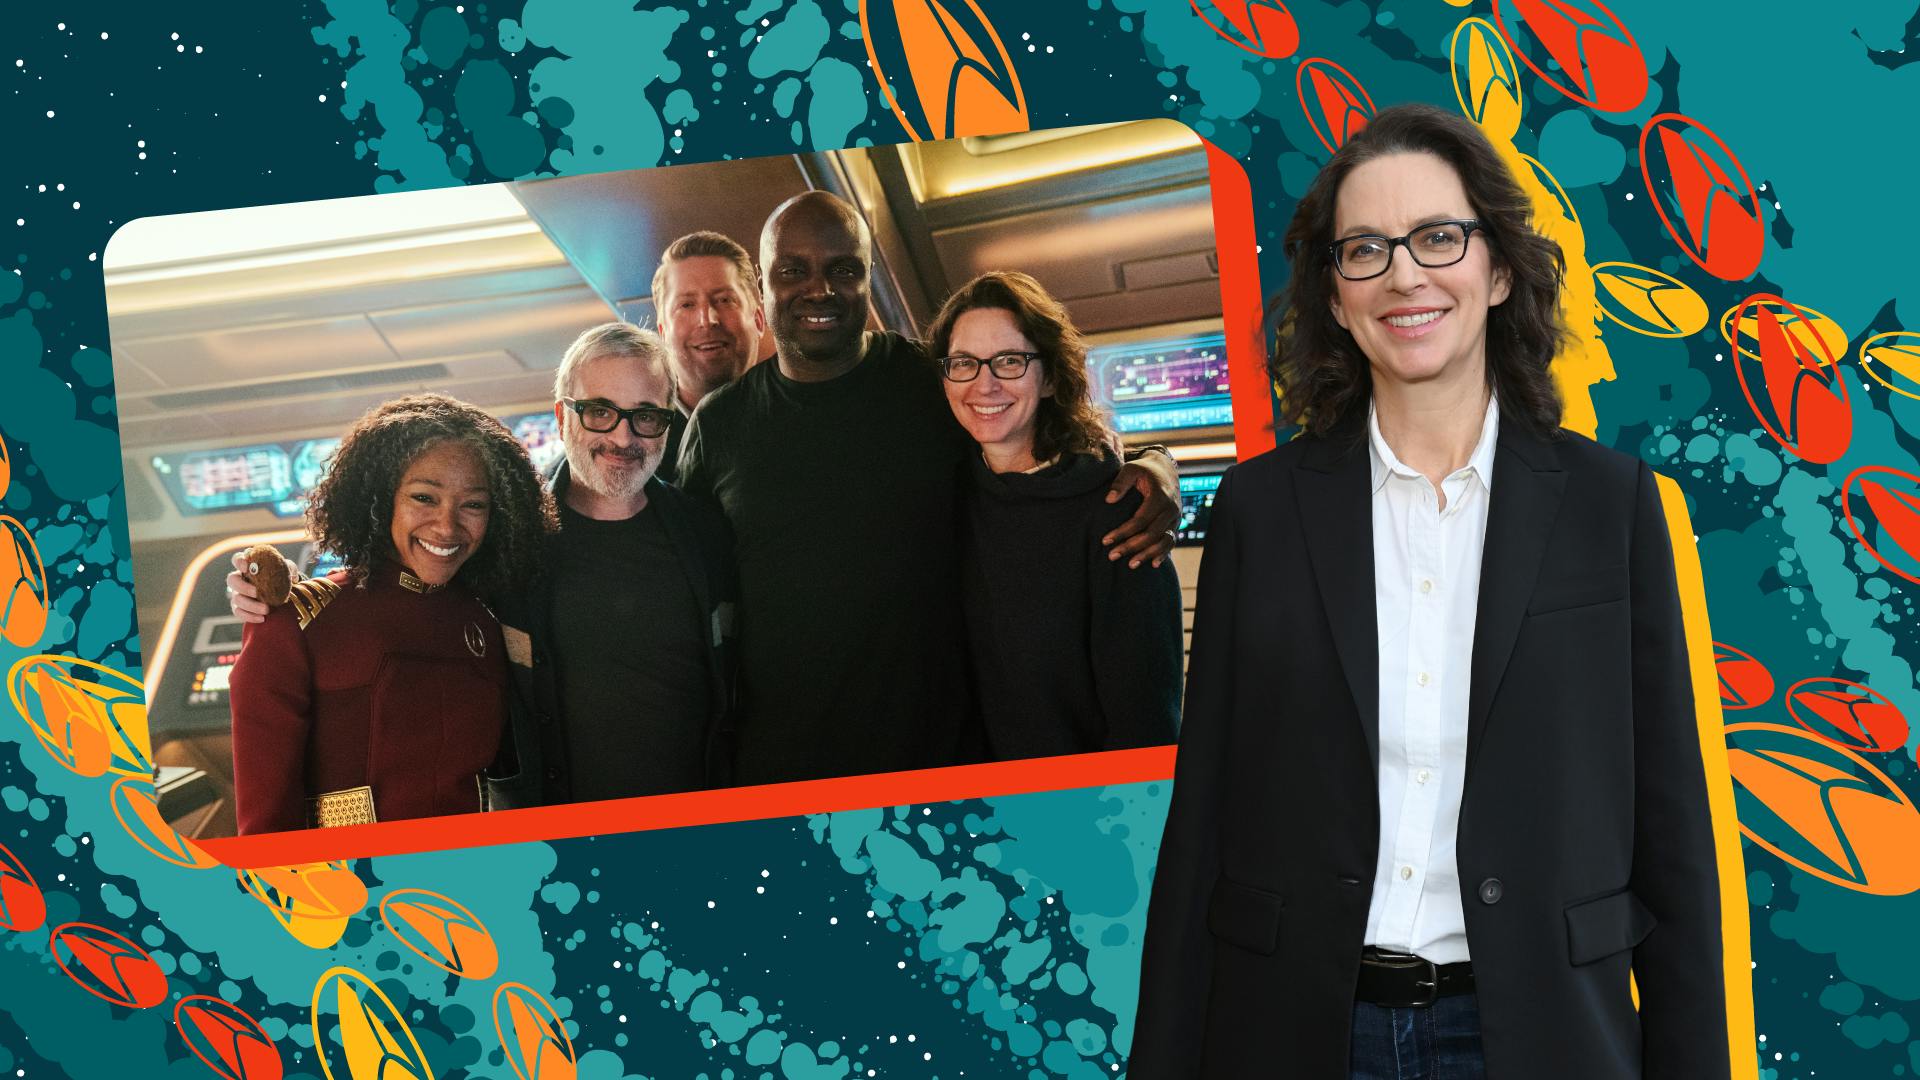 Collage of Michelle Paradise along with a behind-the-scenes Star Trek: Discovery photo of Alex Kurtzman, Aaron Baeirs, Olatunde Osunsanmi, and Michelle Paradise with Sonequa Martin Green